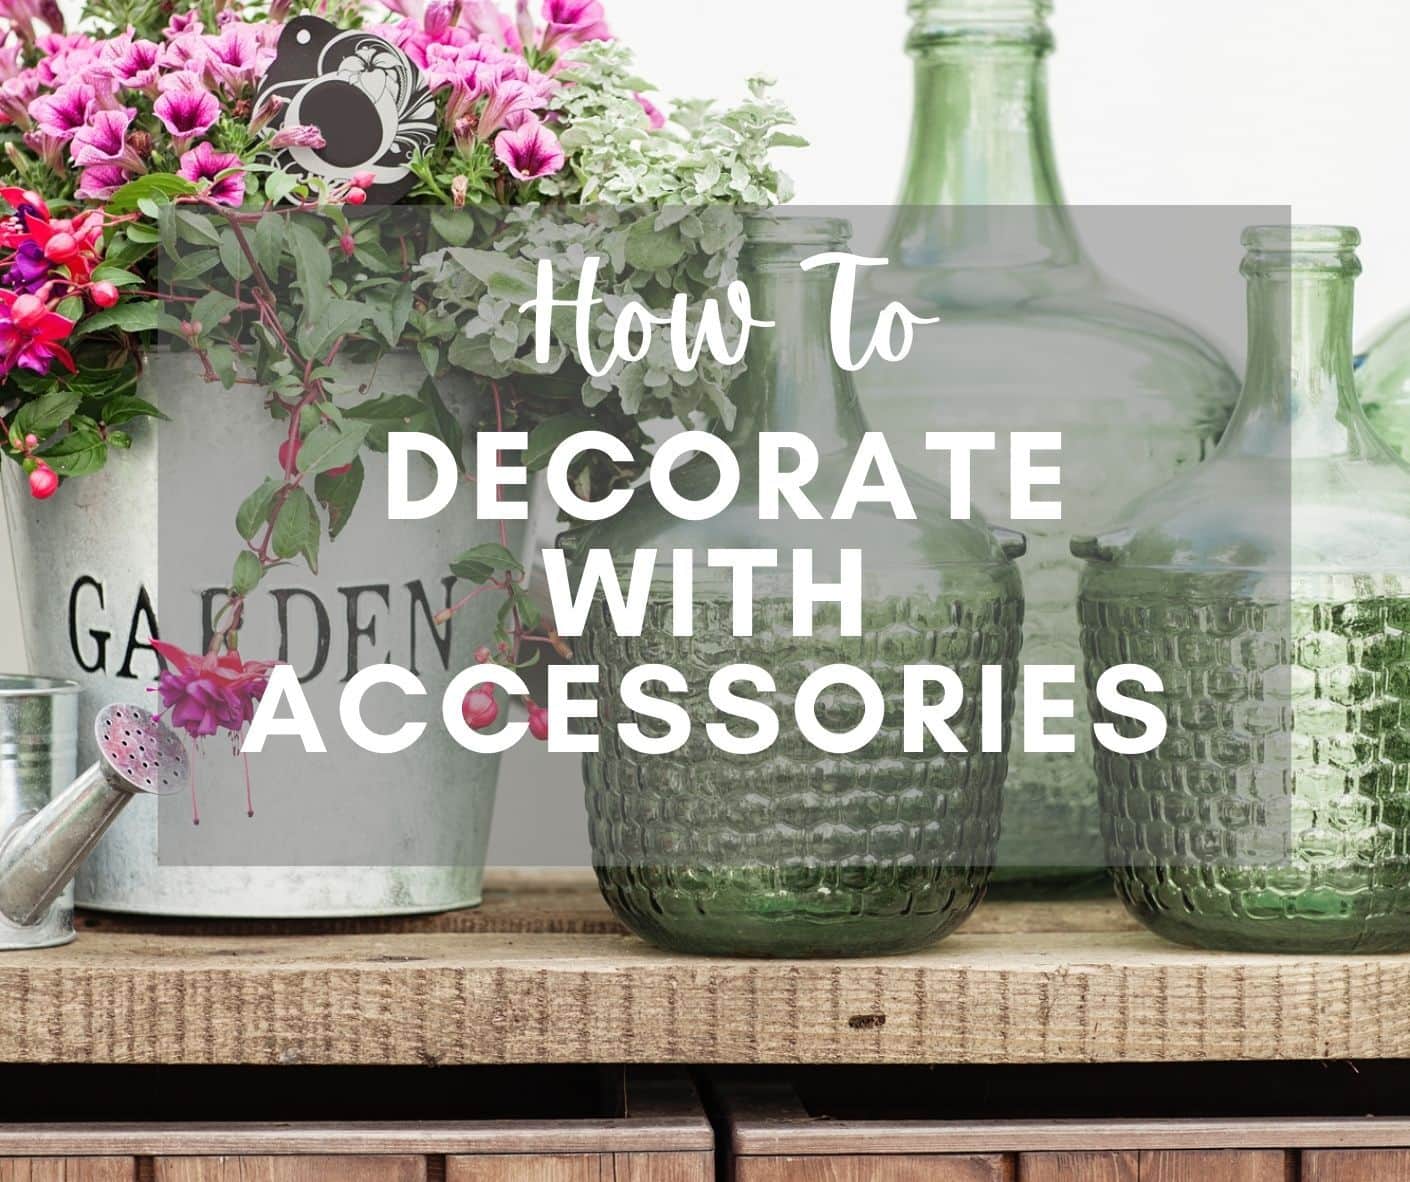 How to decorate with accessories